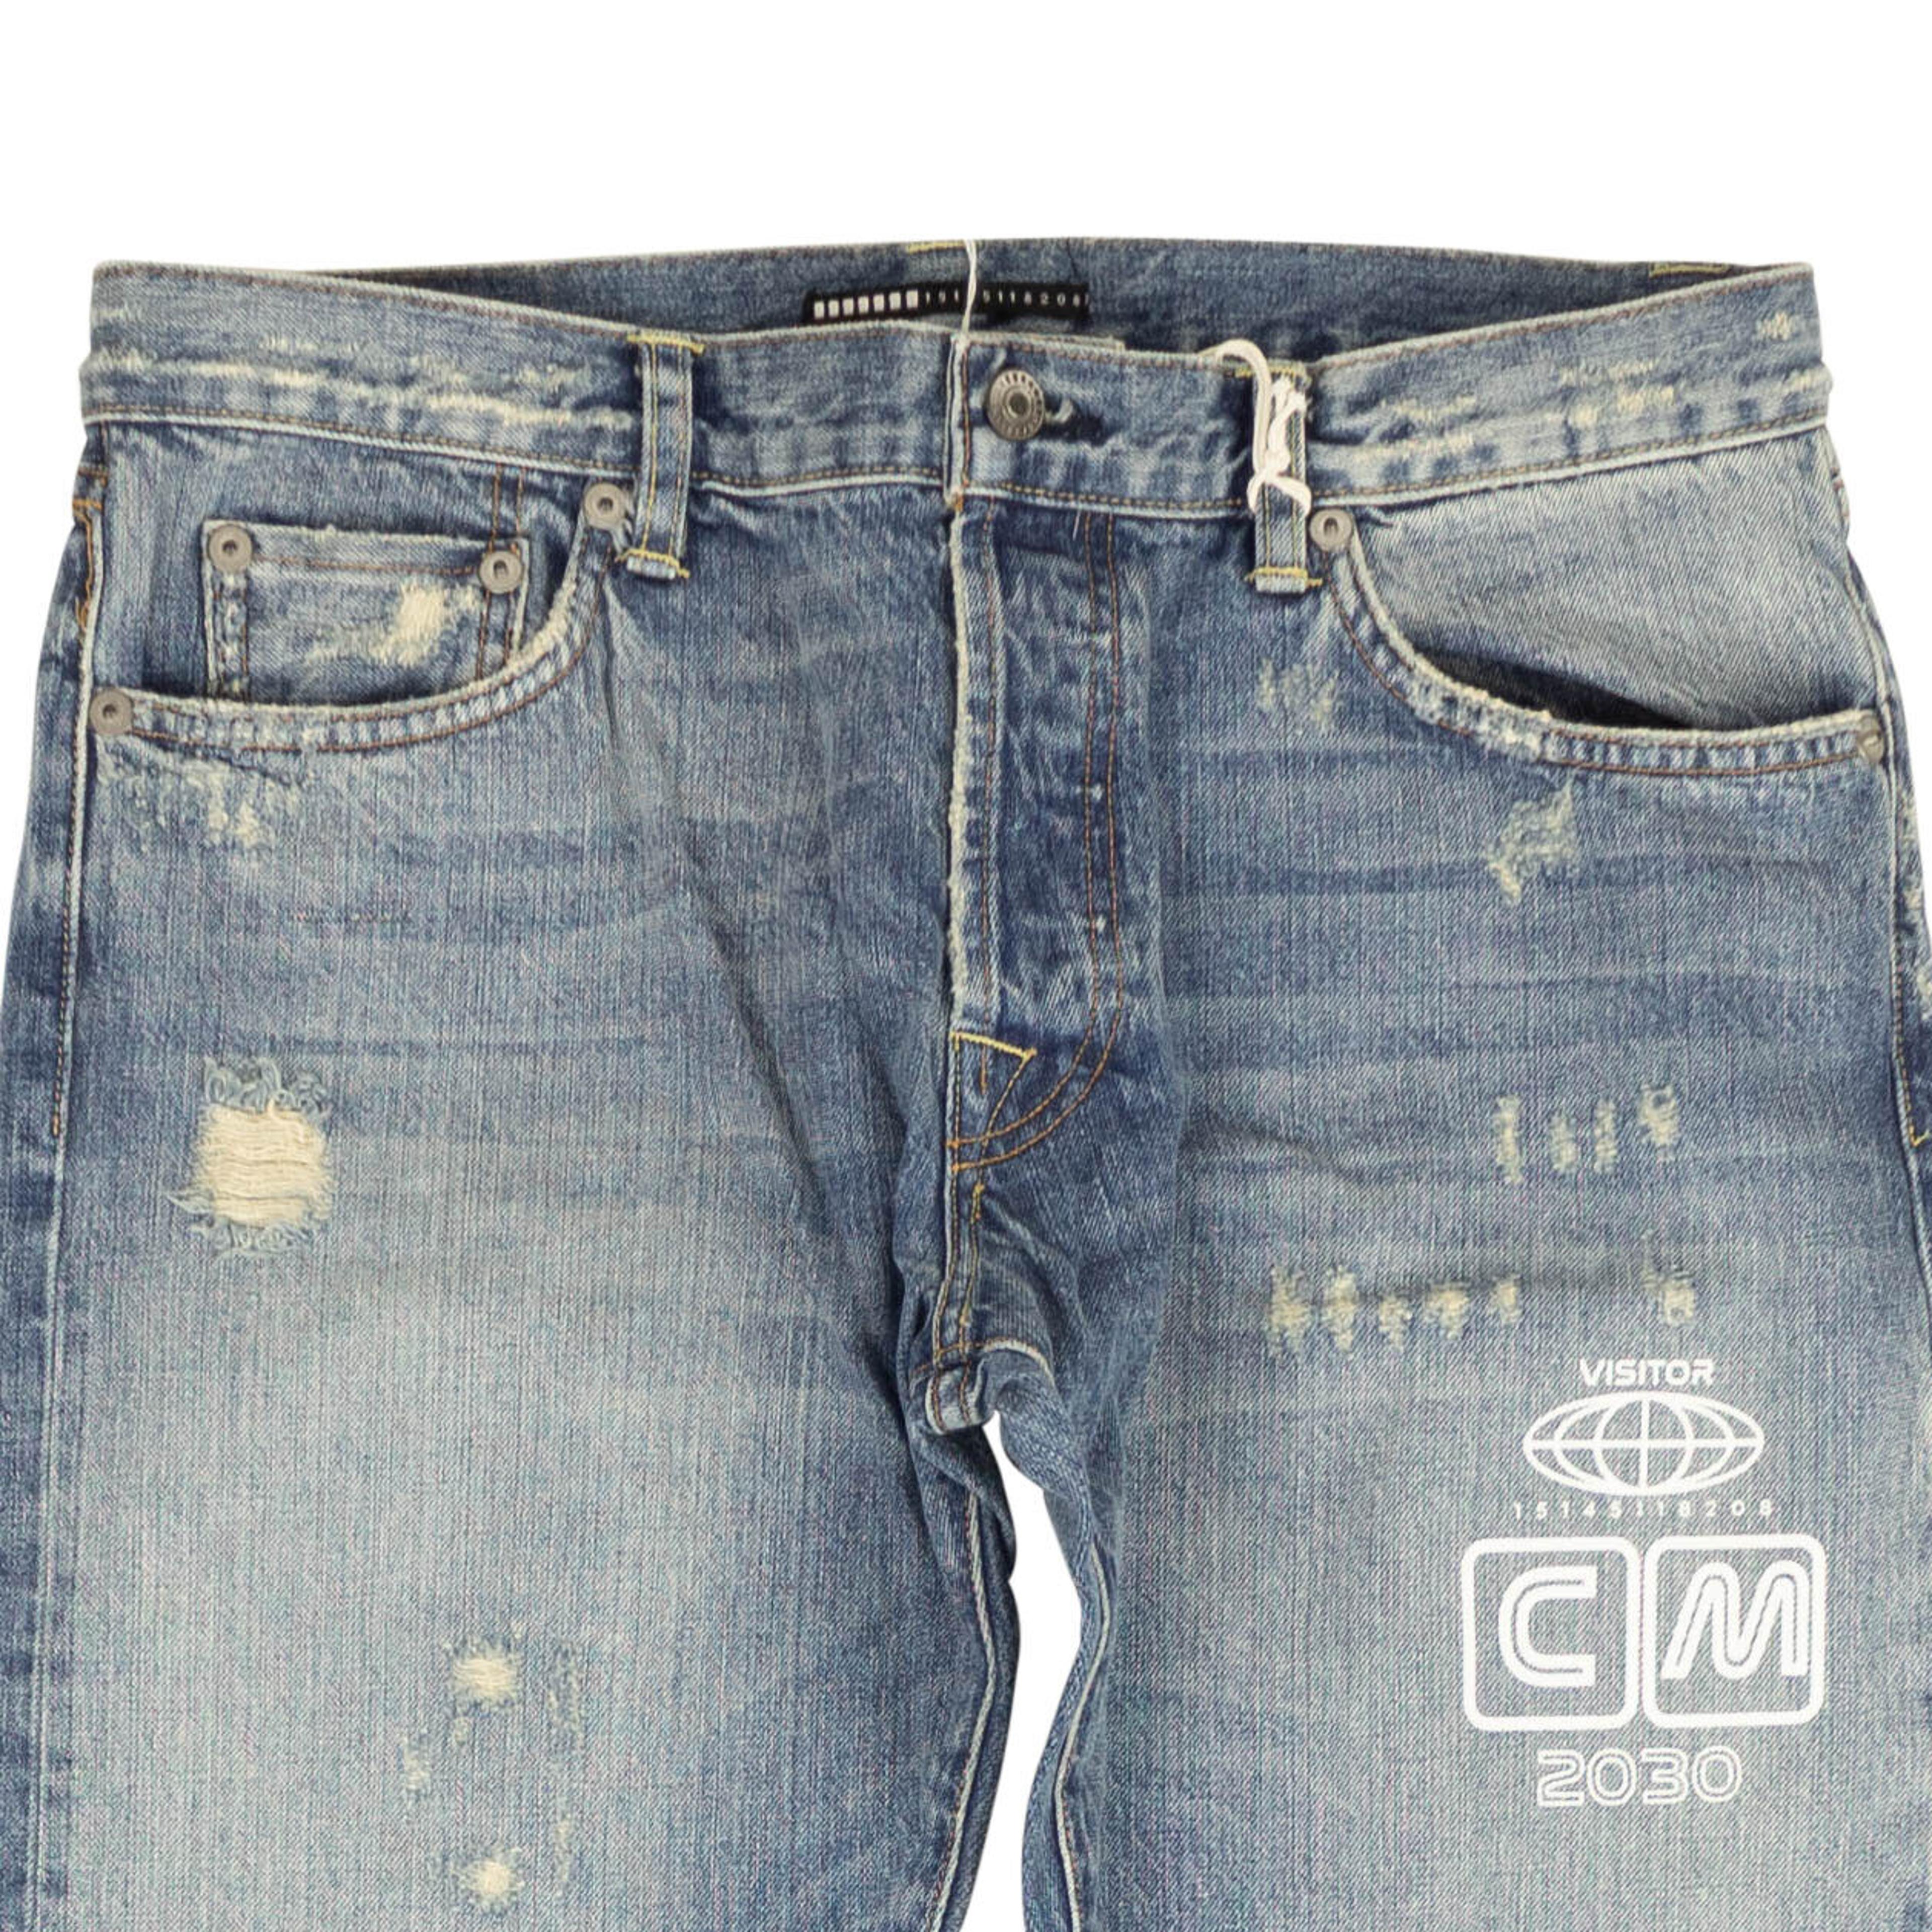 Alternate View 1 of Visitor On Earth Distressed Jeans - Blue